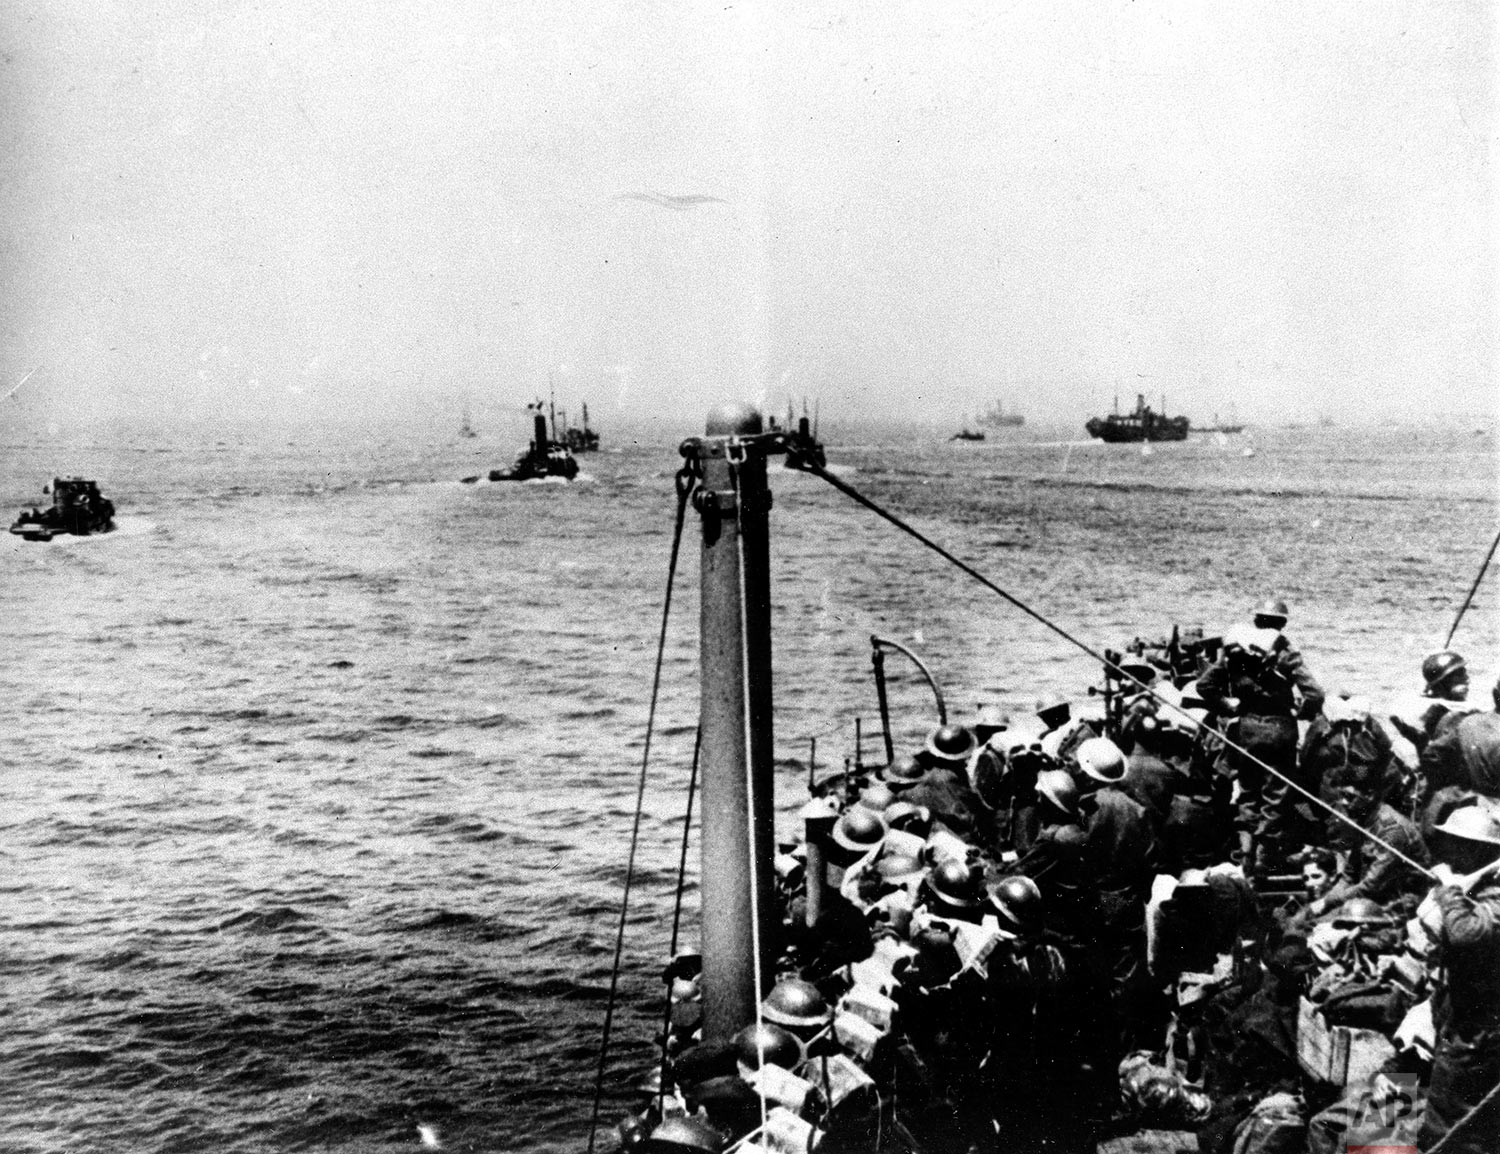  Some of the many ships carrying Allied forces across the English Channel from Dunkirk, France, between May 29 and June 3, 1940, are shown en route for England during the successful Operation Dynamo in World War II.  Over three-hundred thousand Frenc